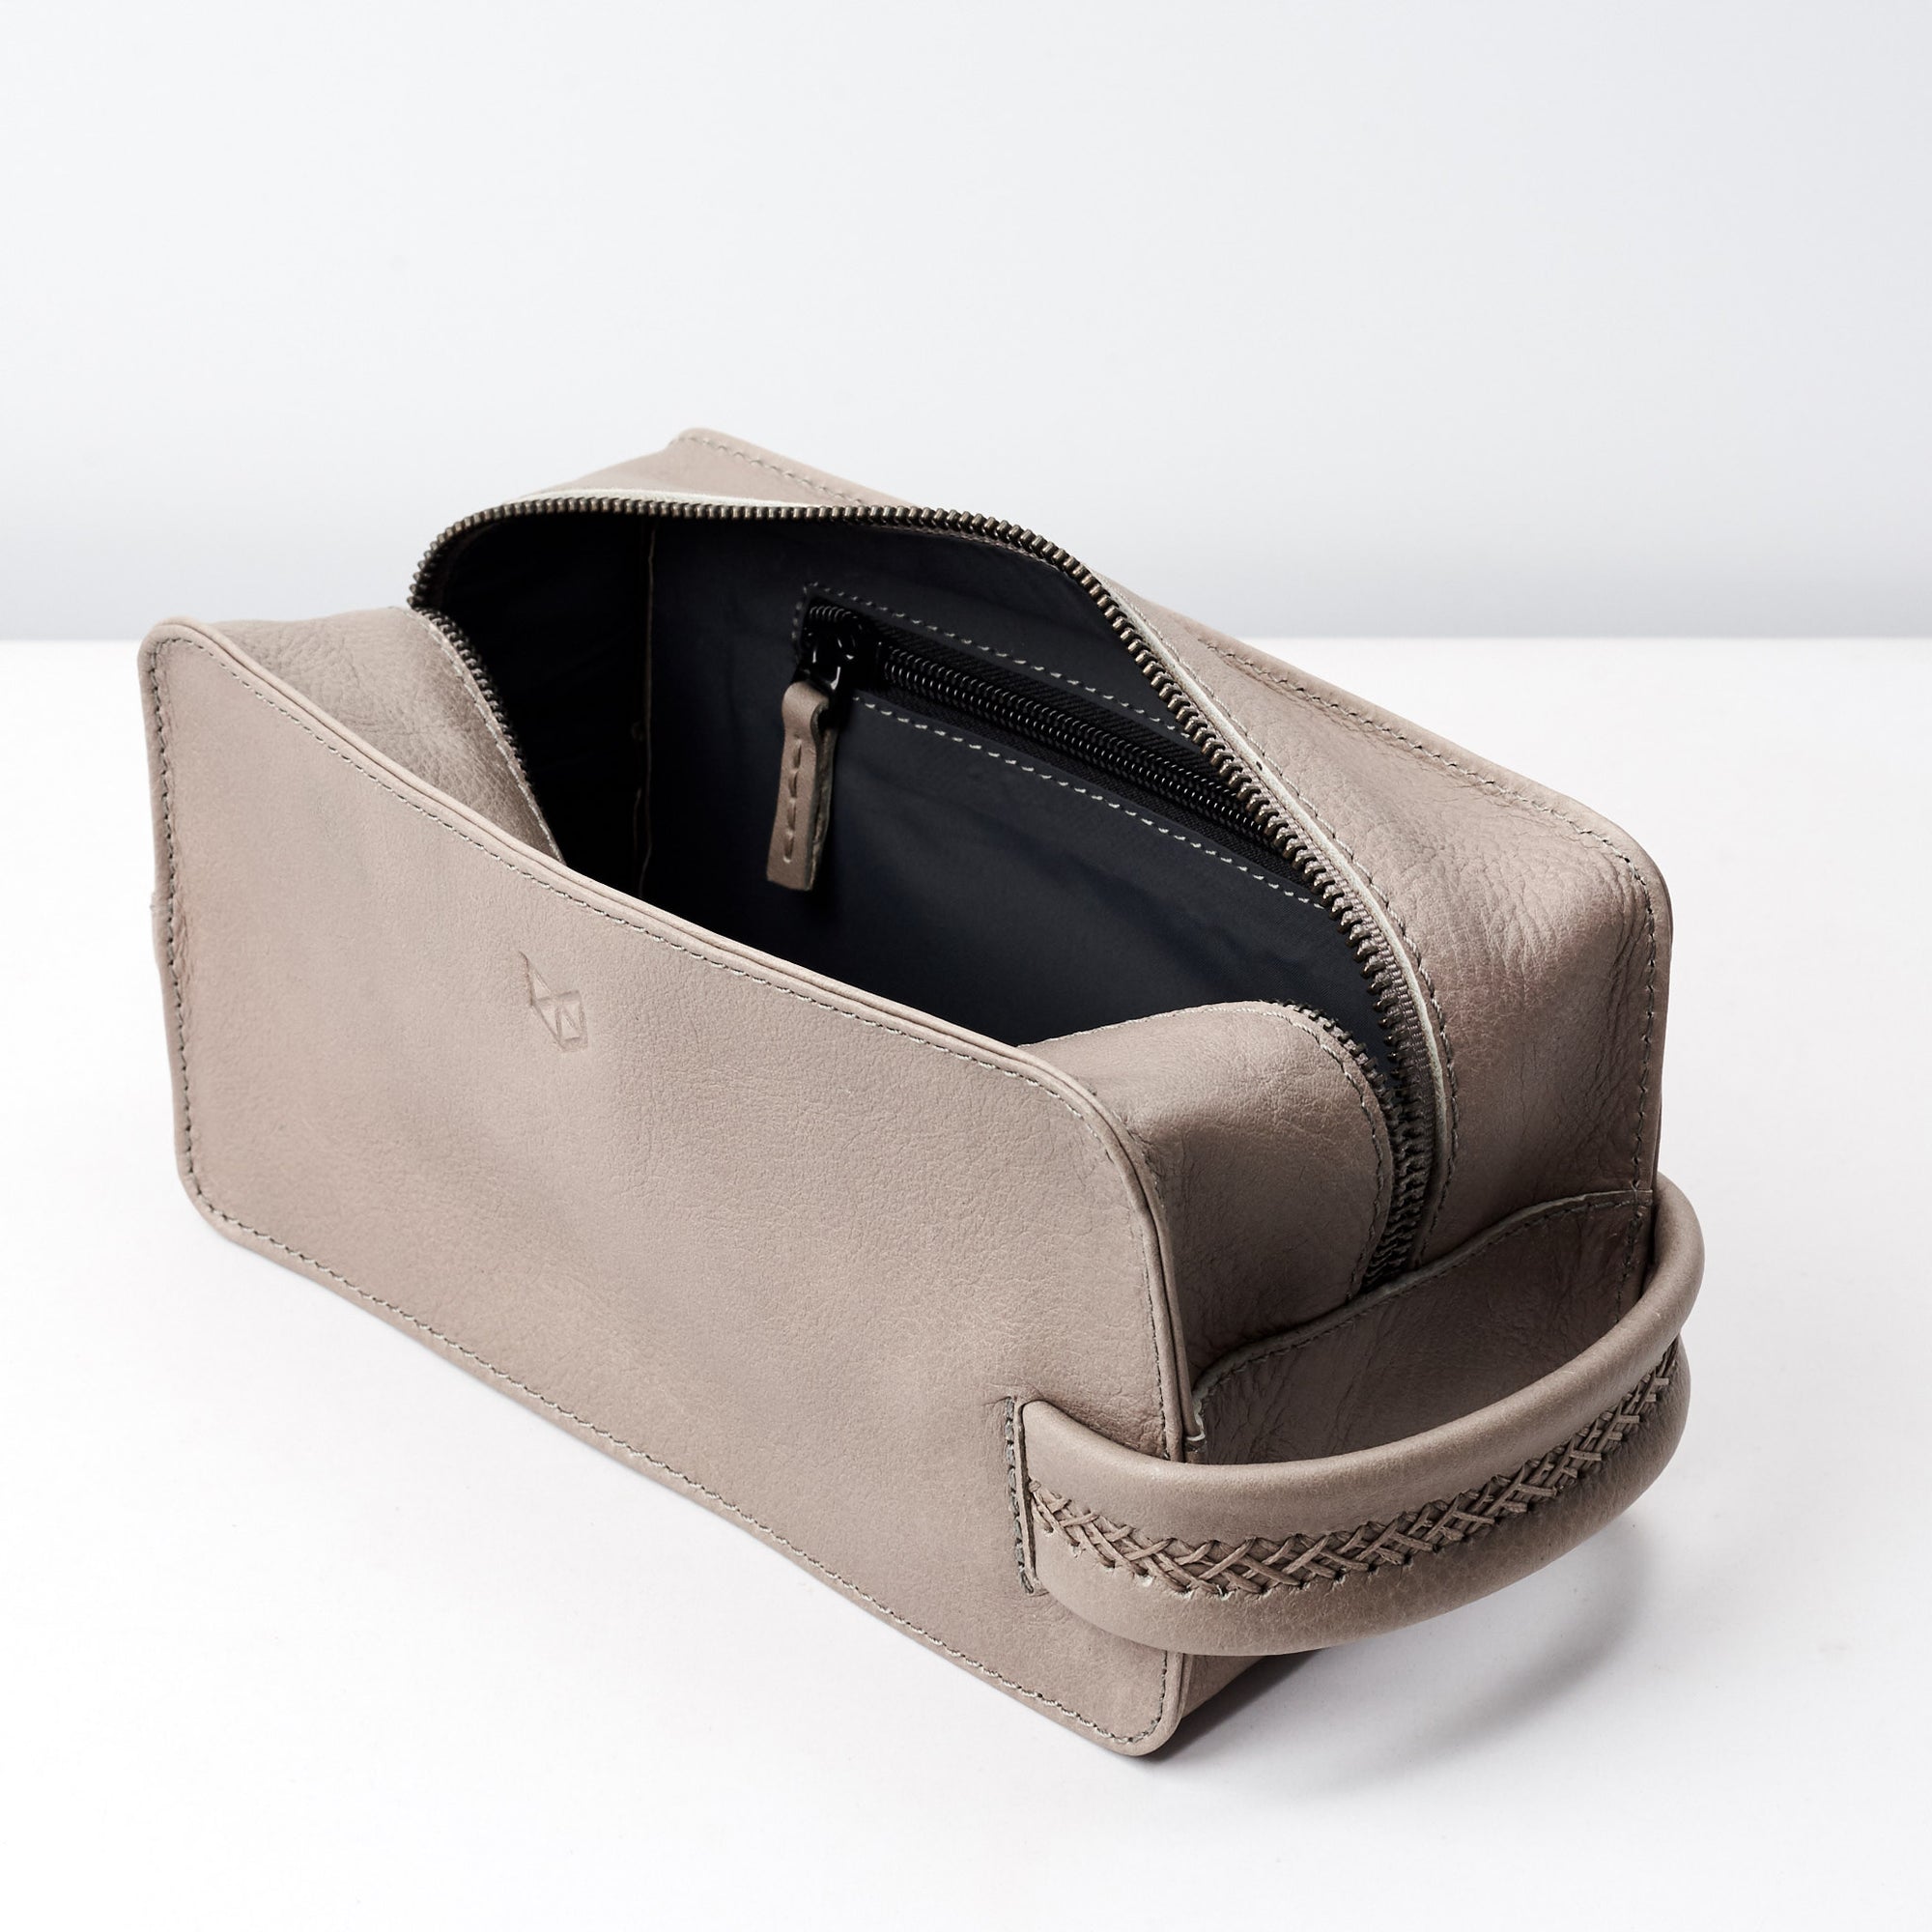 Leather toiletry bag with interior pocket for small essentials. Grey leather shaving bag for mens gifts